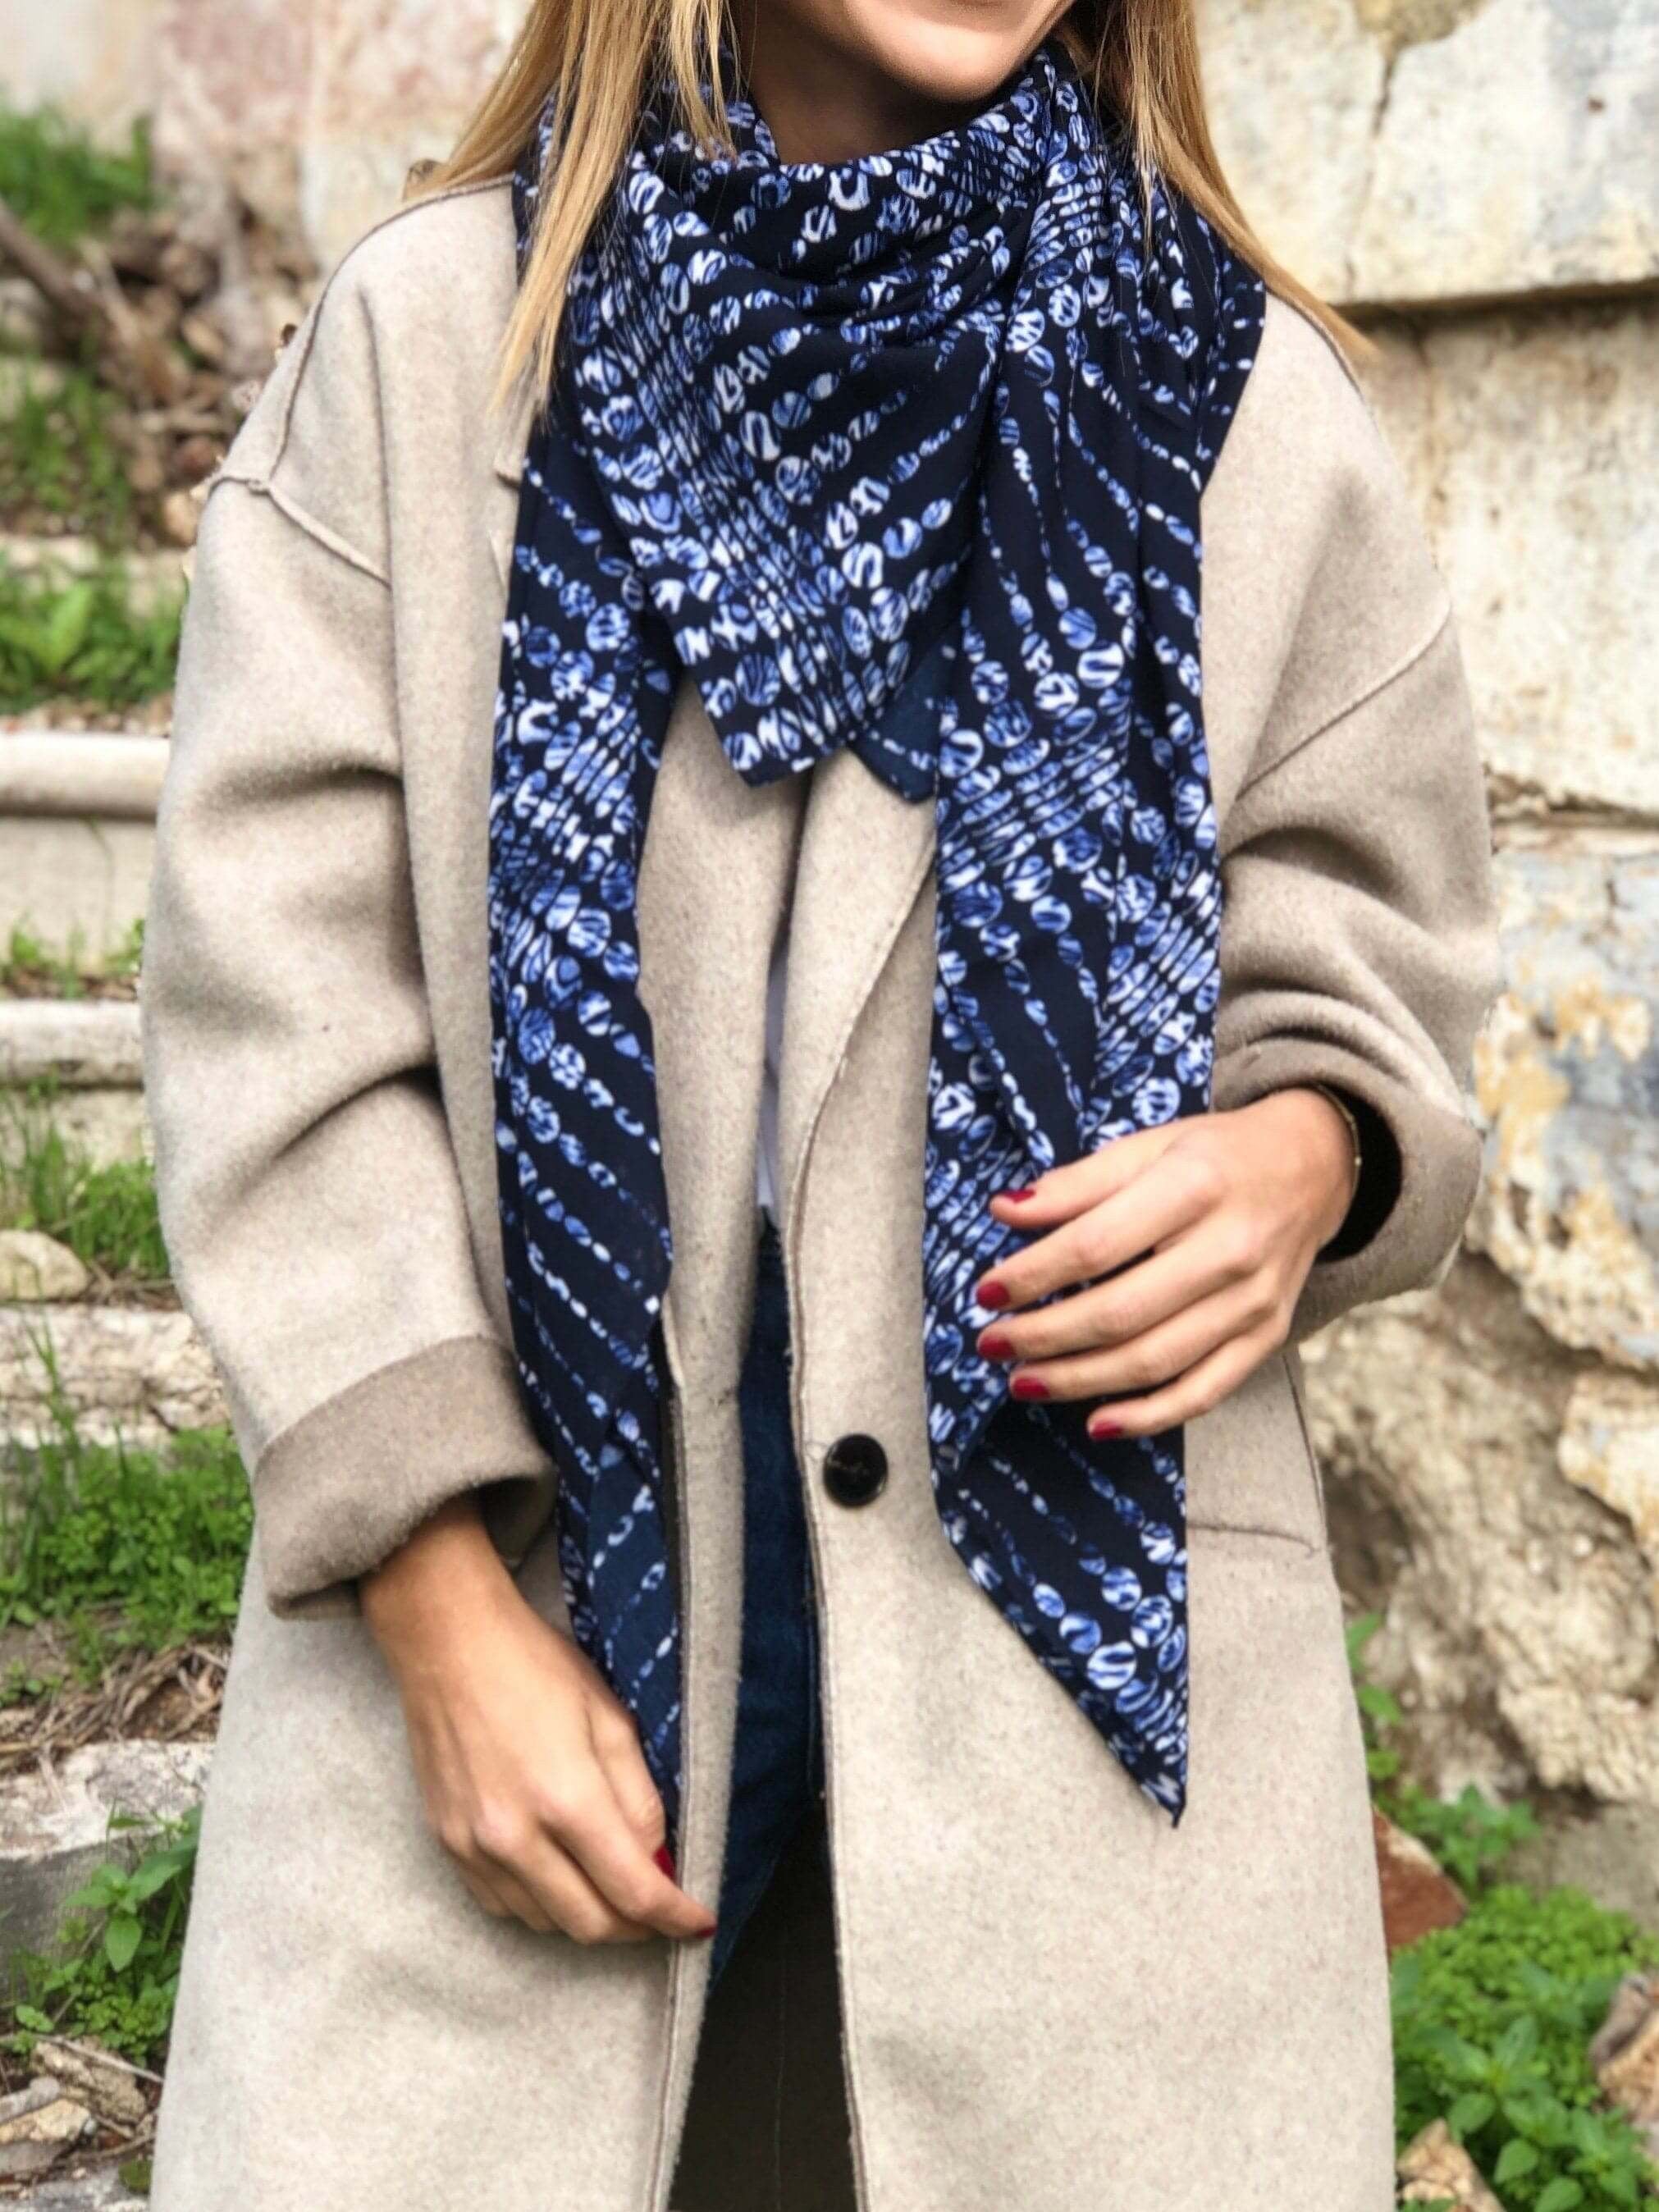 Dark Blue and White Cotton Scarf - The perfect finishing touch to any outfit.